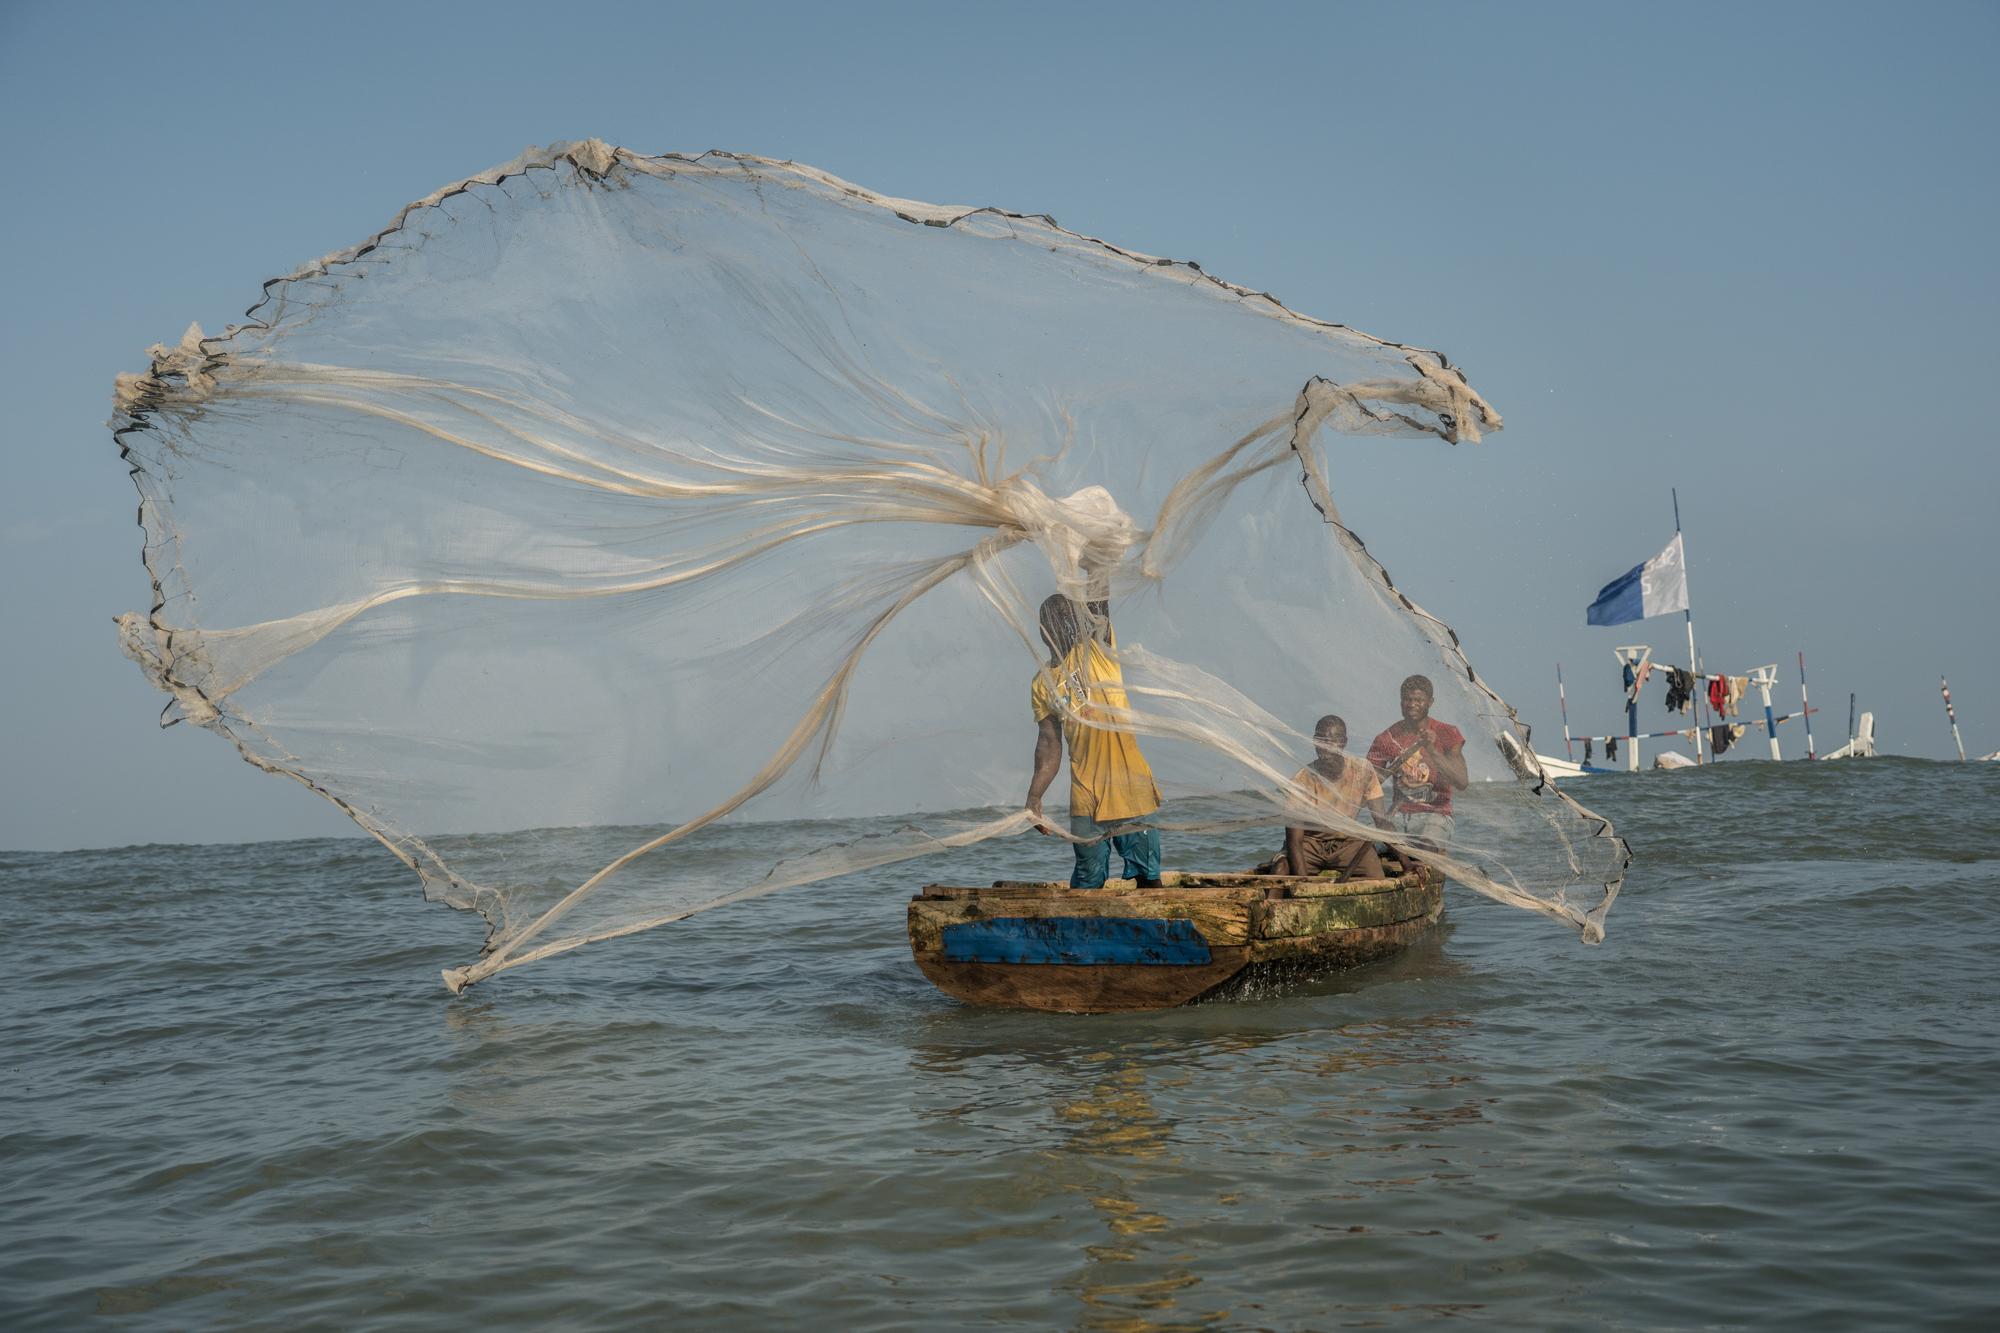 Fisherman throws the net to catch fish in the Gulf of Guinea, Jamestown, Accra. Due to illegal fishing trawlers, unsustainable fishing practices...